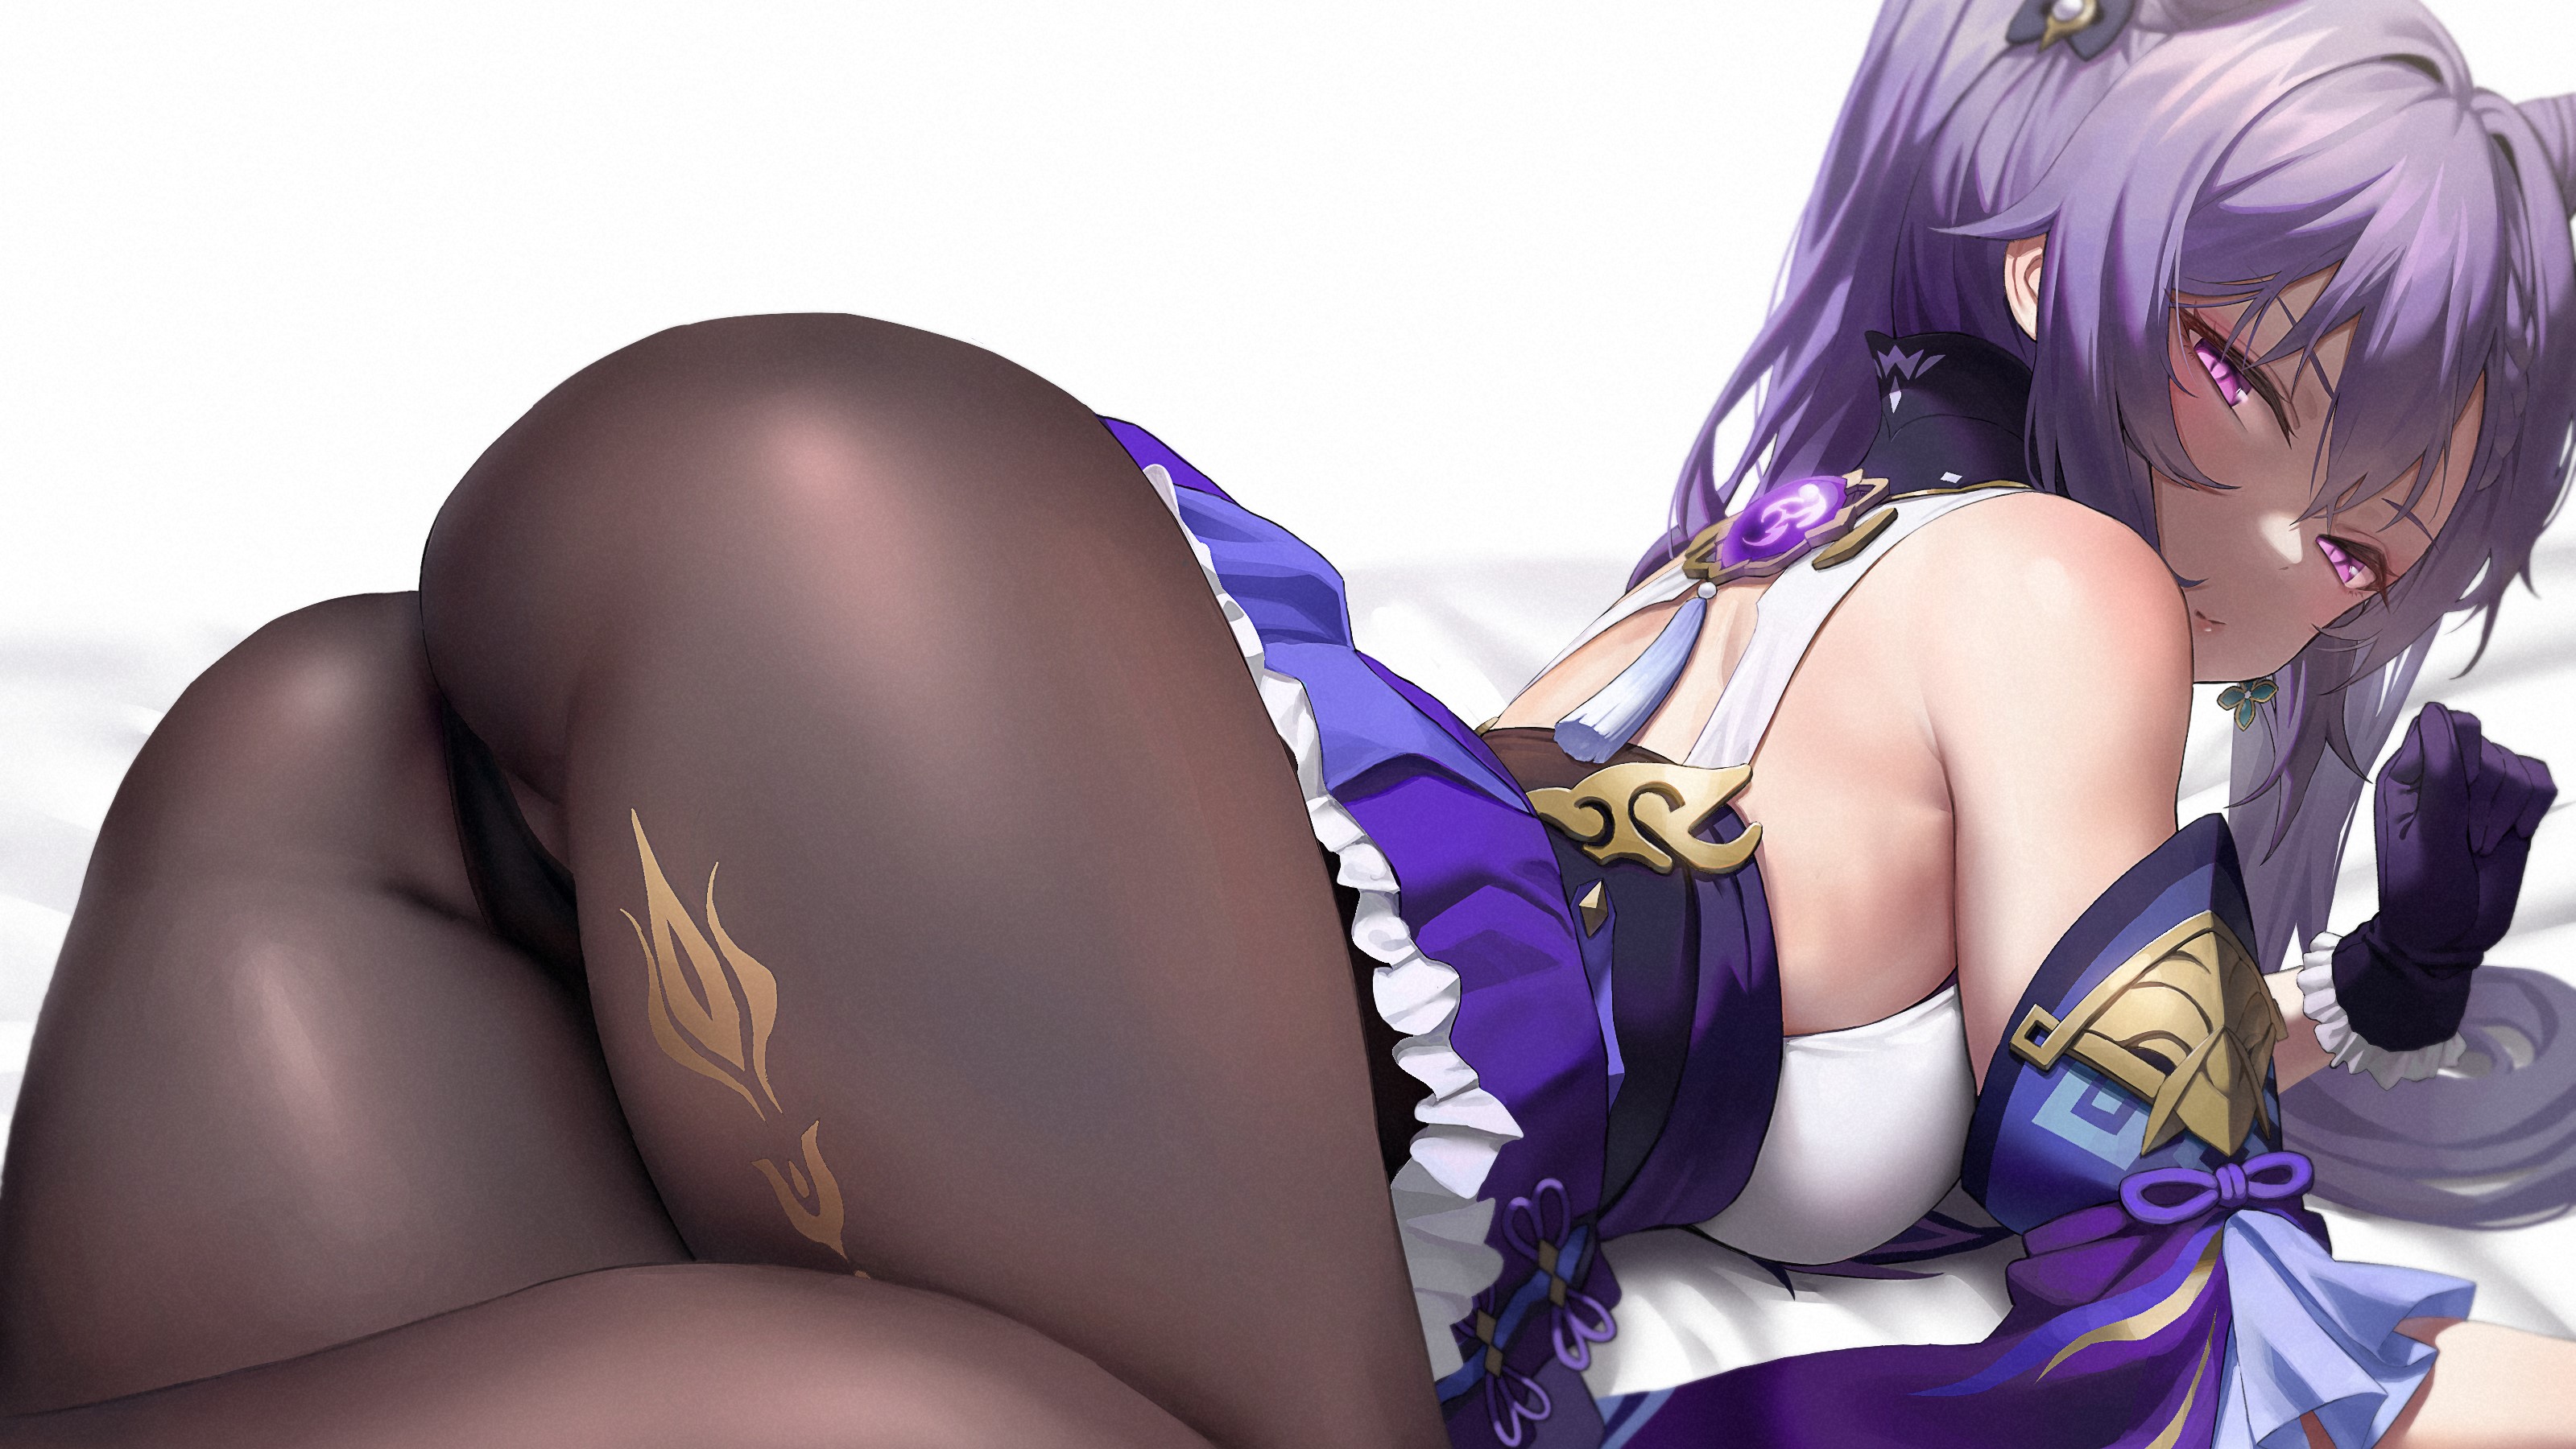 Anime 3199x1800 Mochirong Keqing (Genshin Impact) Genshin Impact anime anime girls curvy video game girls simple background looking back arched back lying on front bent over bottom up twintails long hair dress ass upskirt skirt panties tight clothing stockings black stockings thighs thick thigh